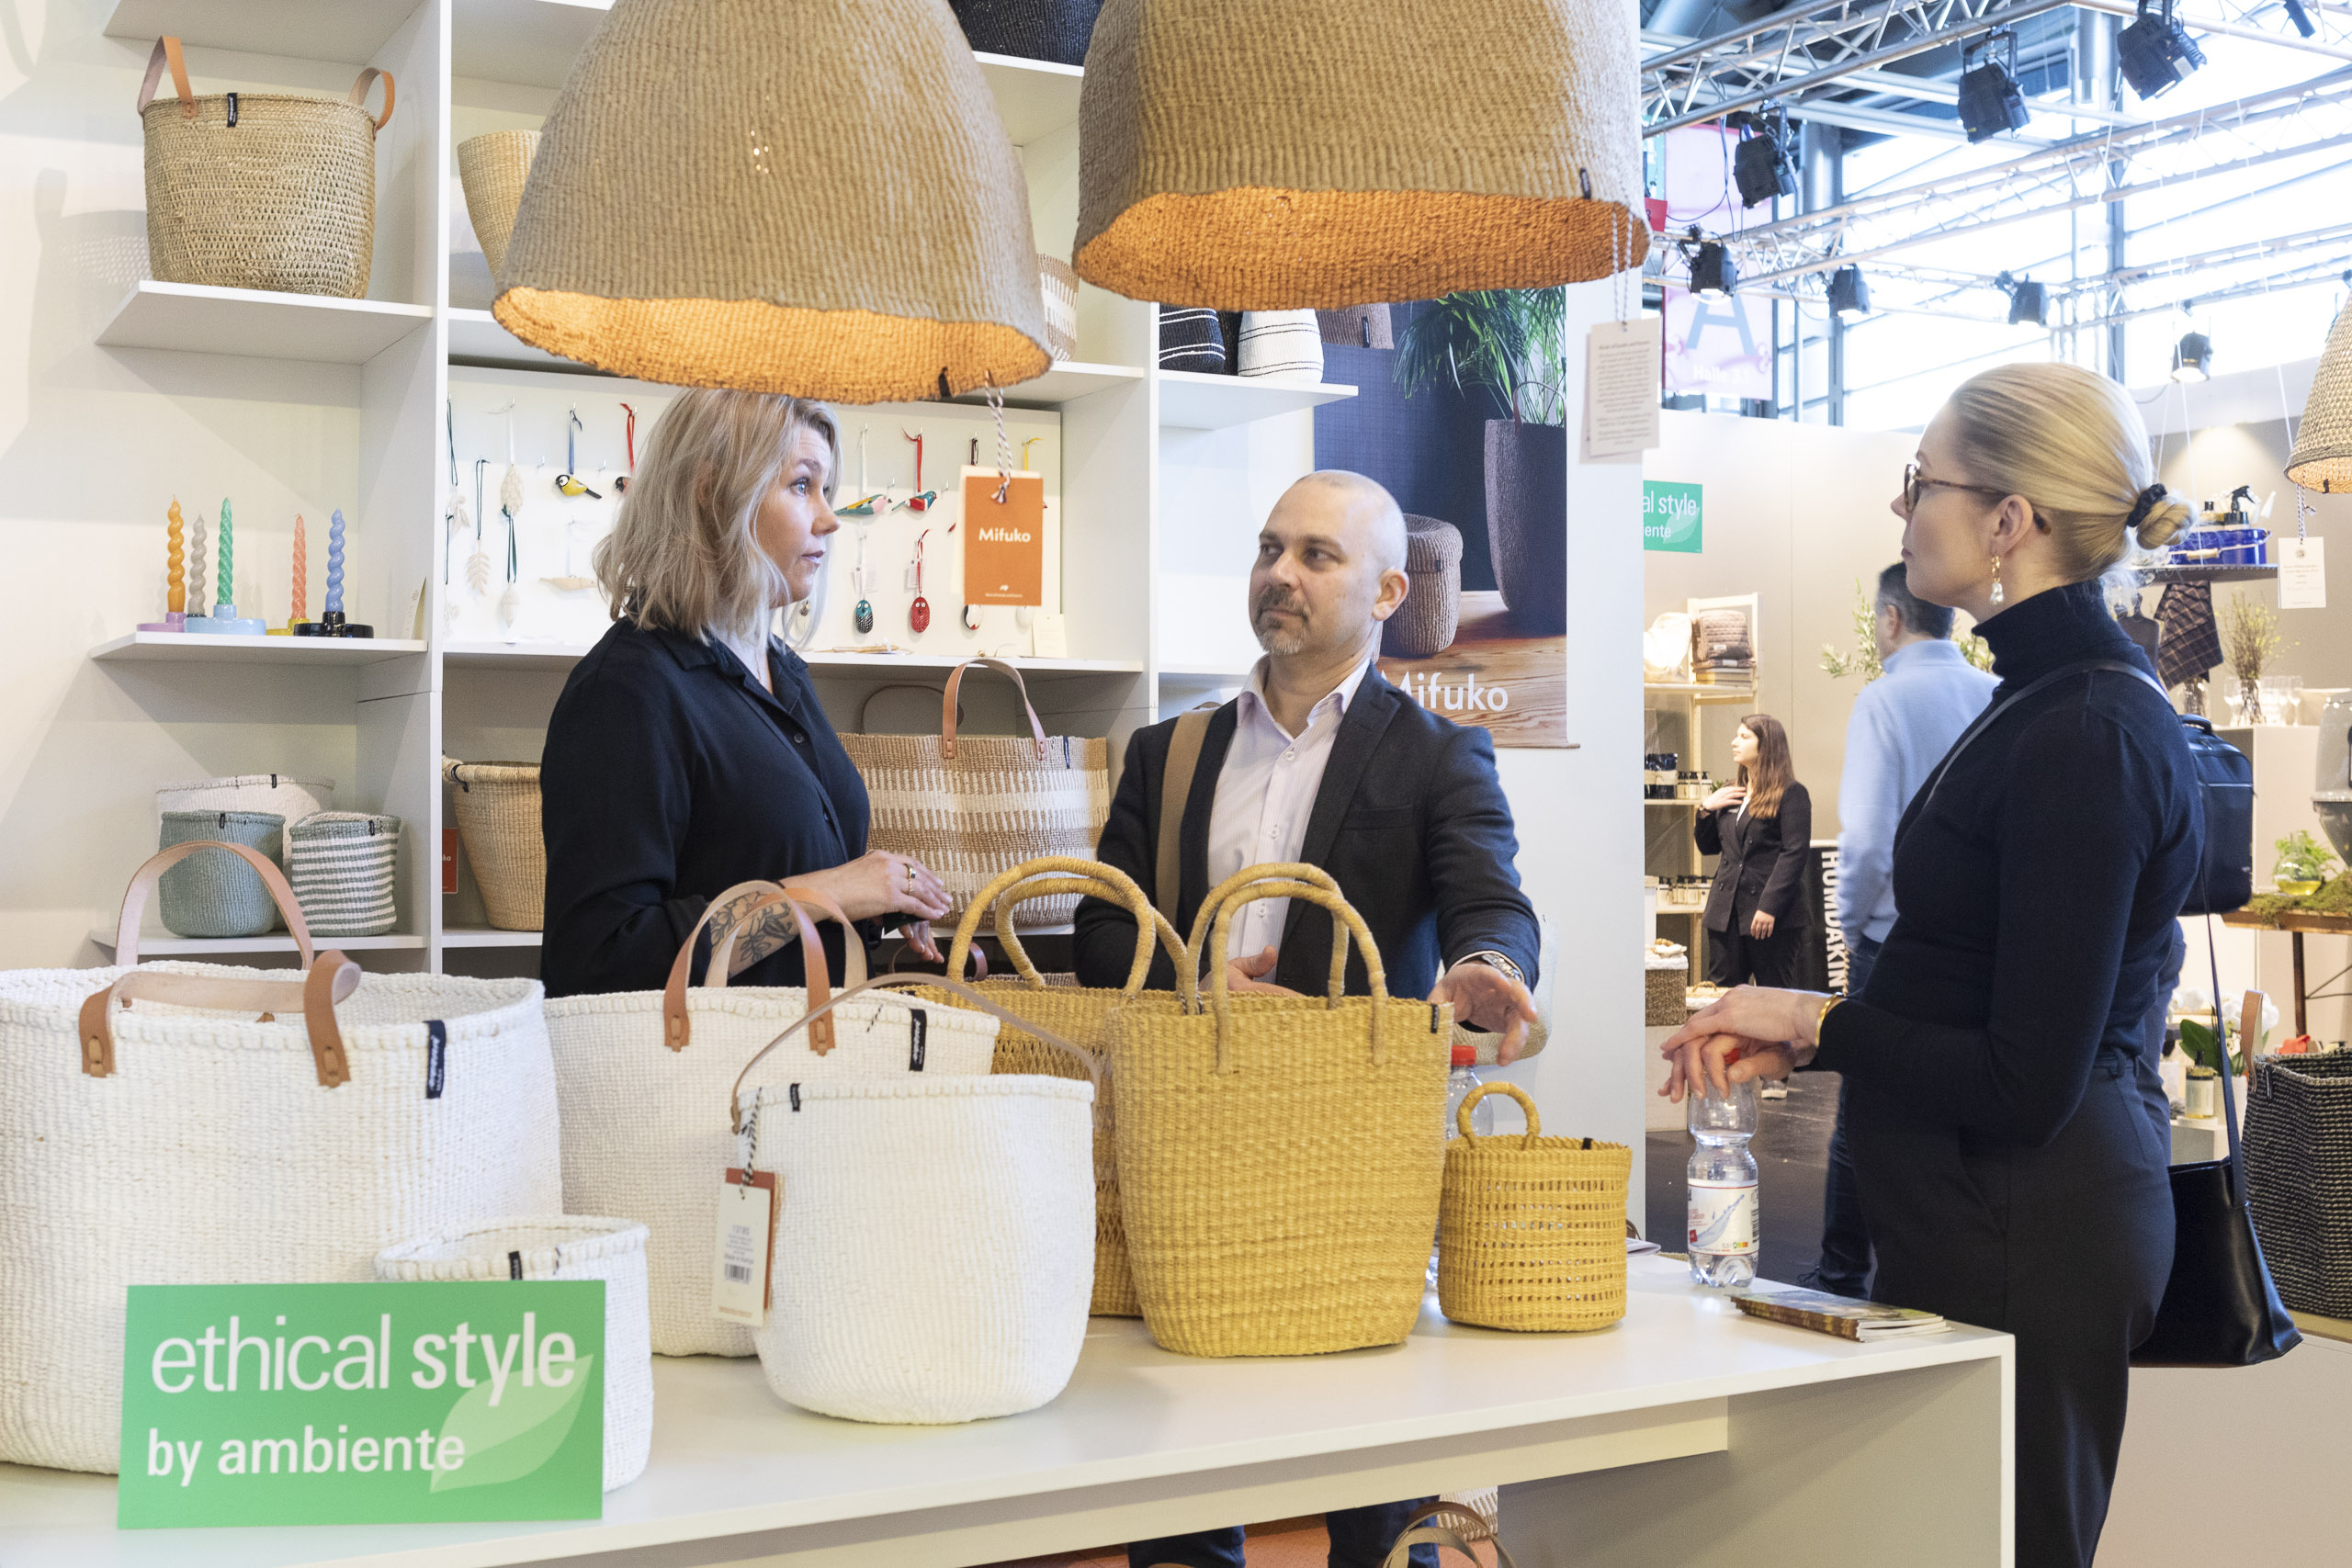 The baskets, bags and home accessories from the Finnish company Mifuko